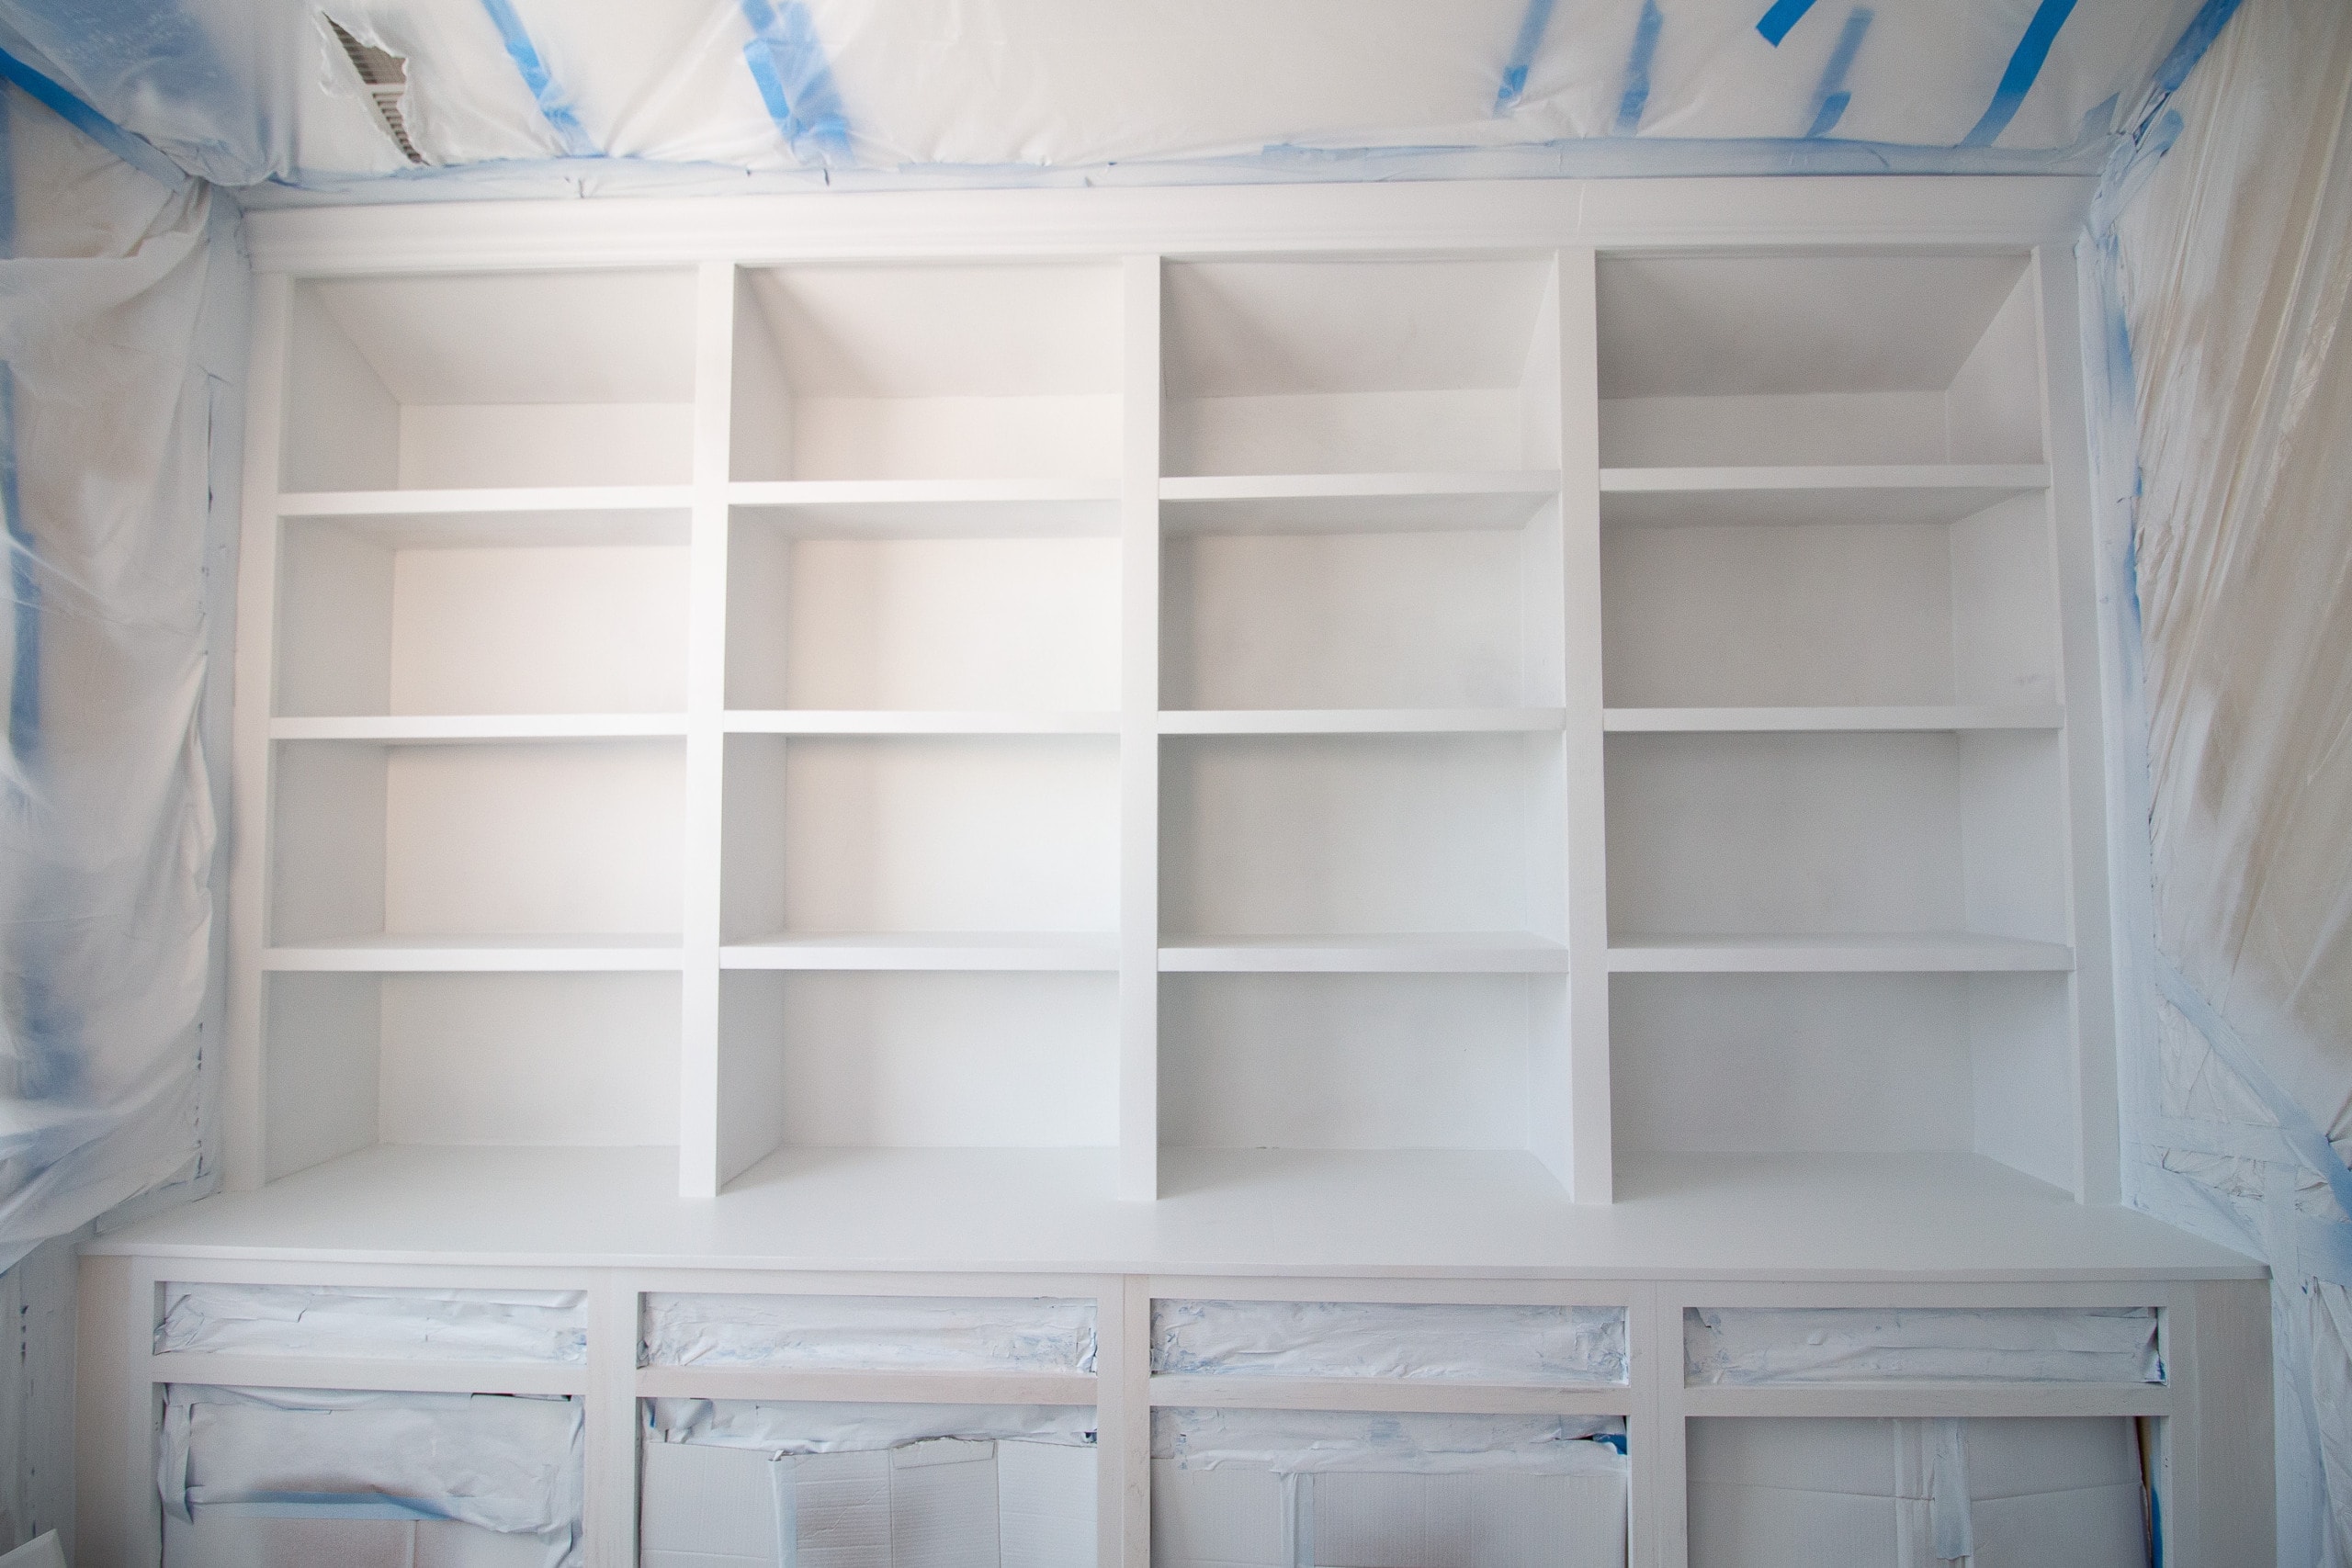 Priming and painting built-ins